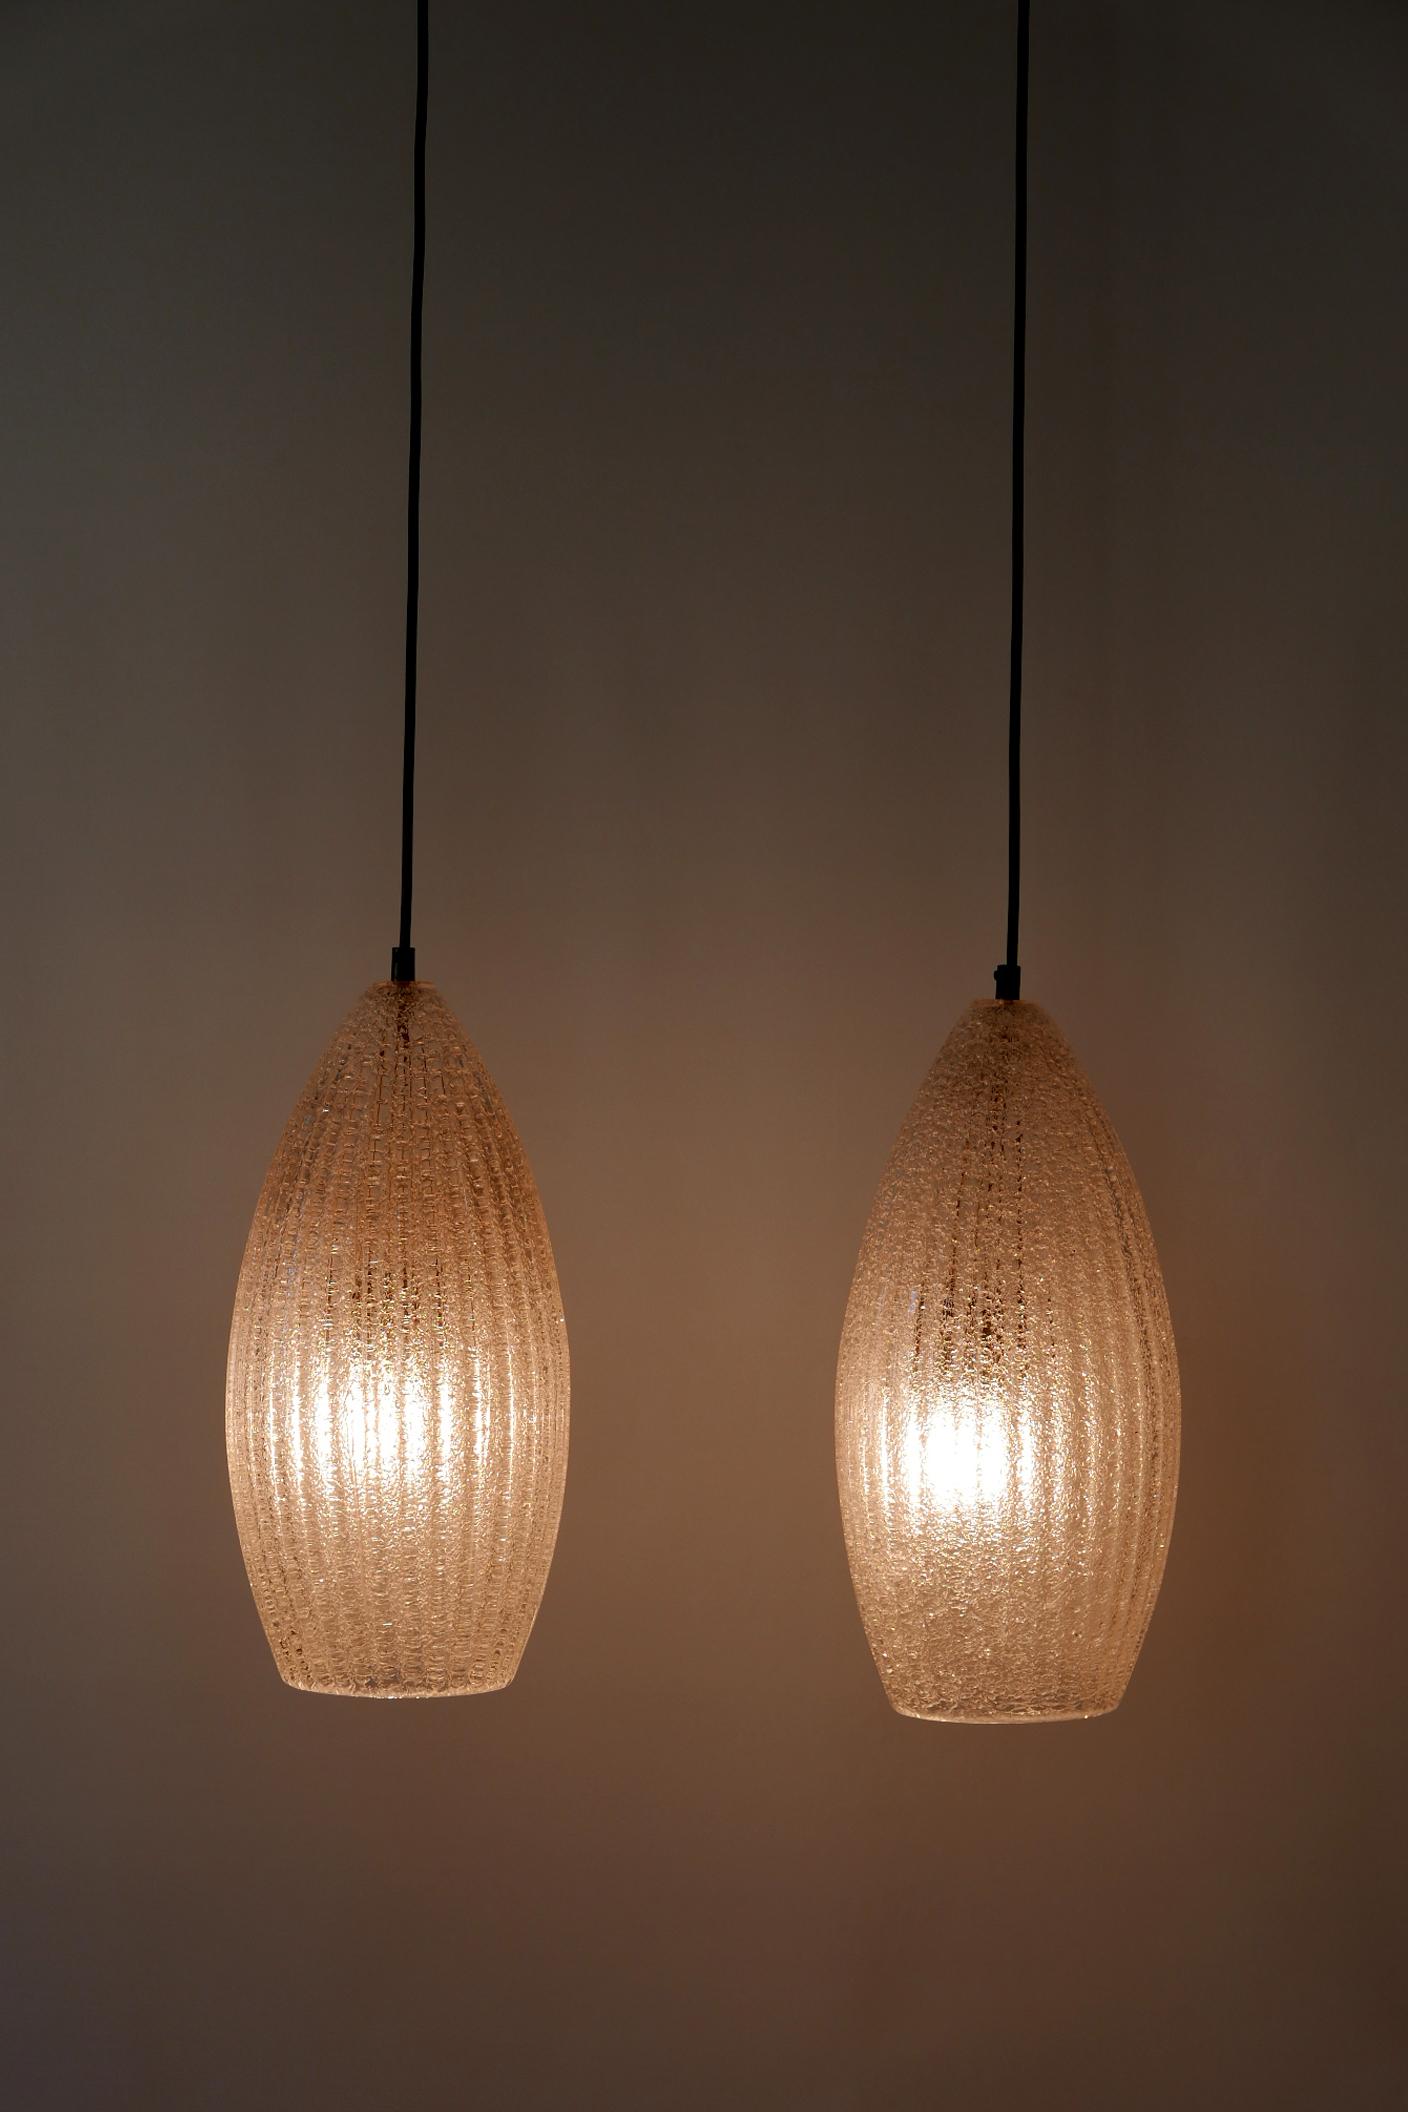 Set of Two Mid-Century Modern Textured Glass Pendant Lamps, 1960s, Germany For Sale 7